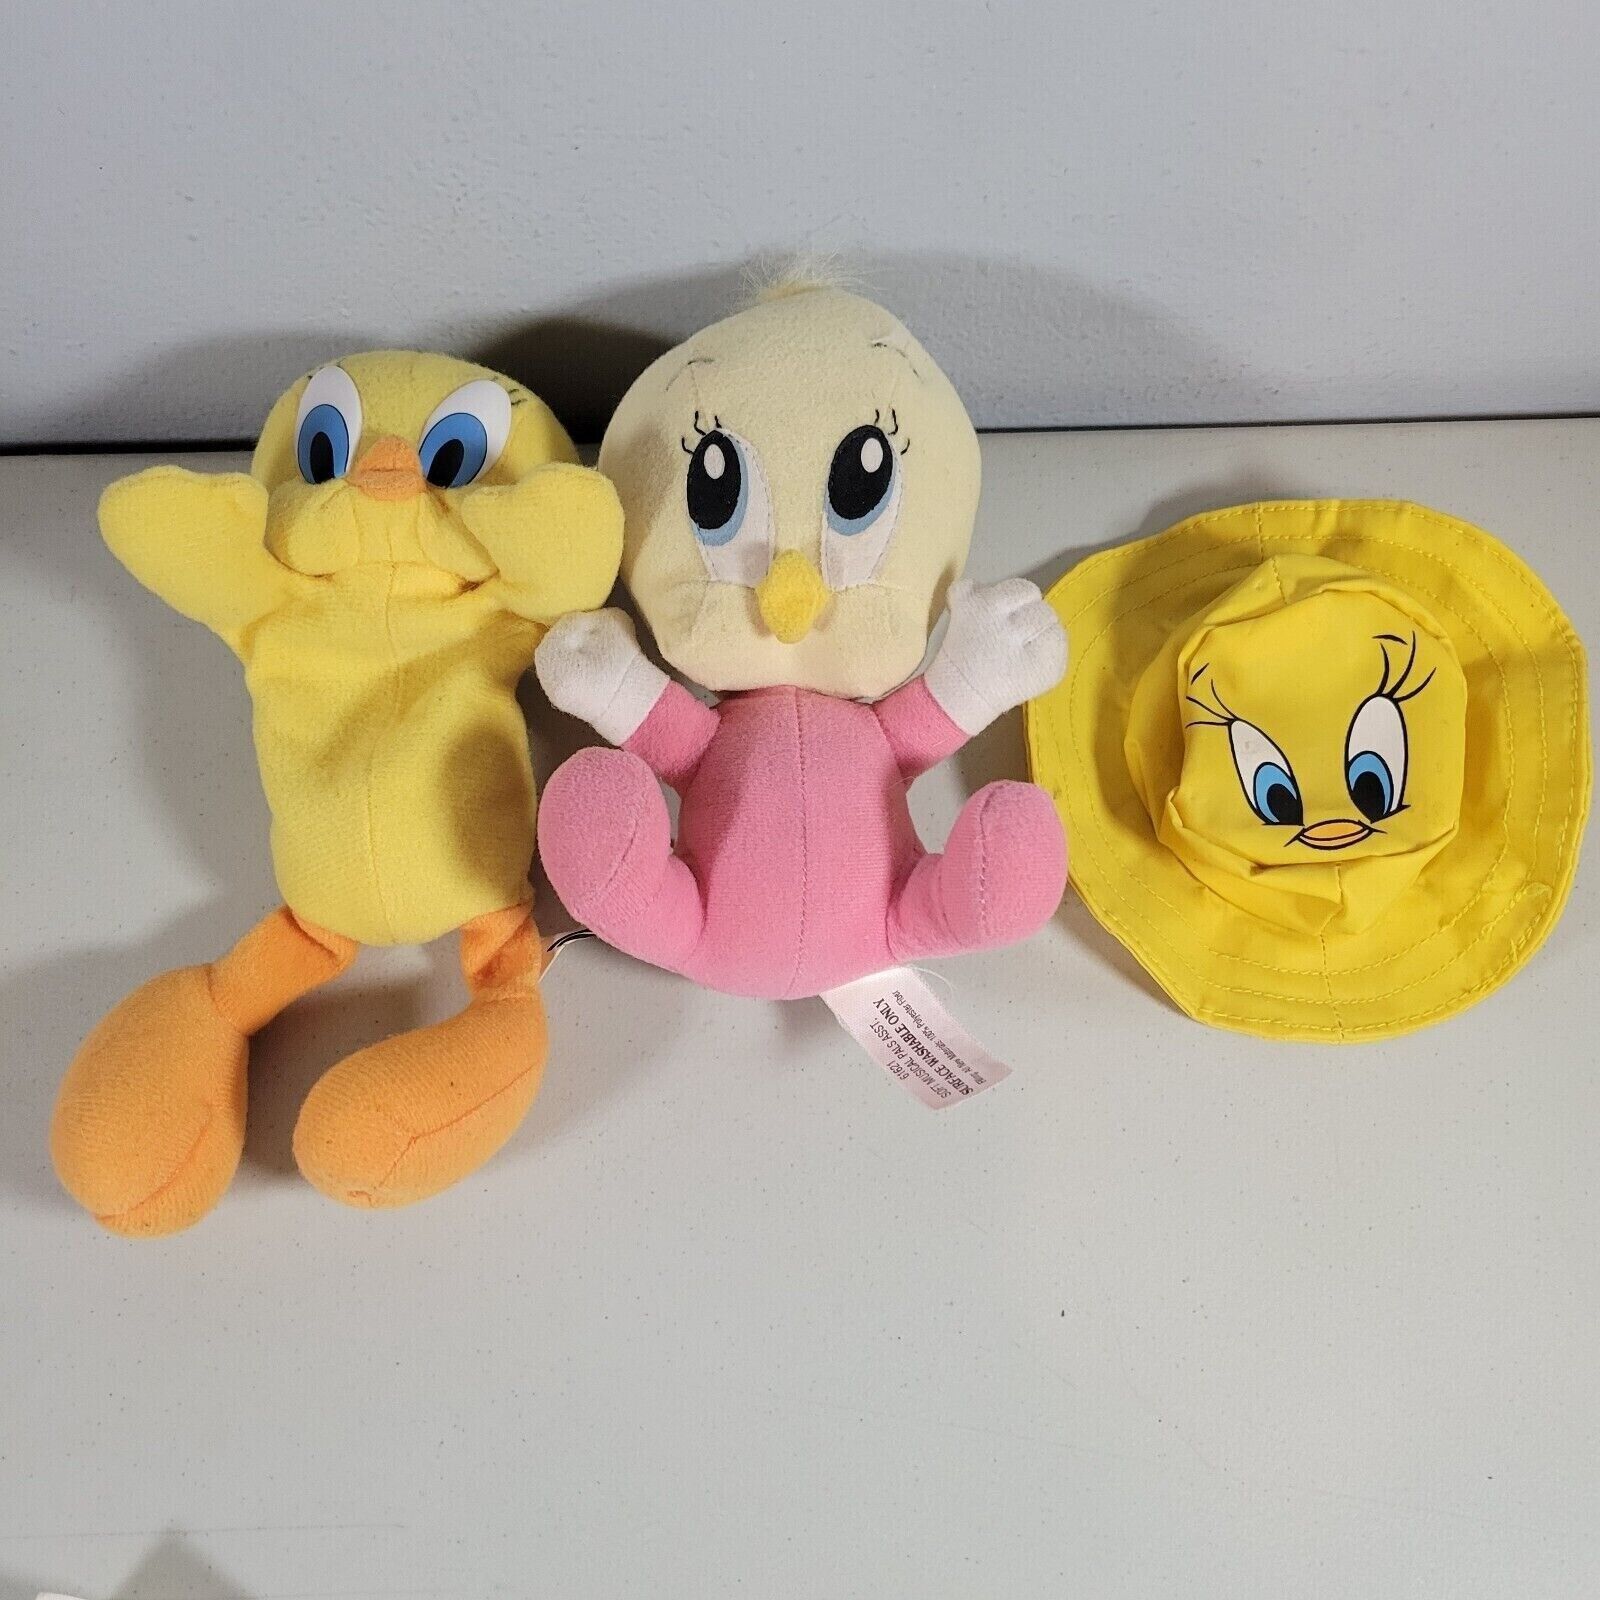 Tweety Bird Lot of 3 Plush Yellow and Yellow and Pink and Keychain Coin Pouch - $18.99